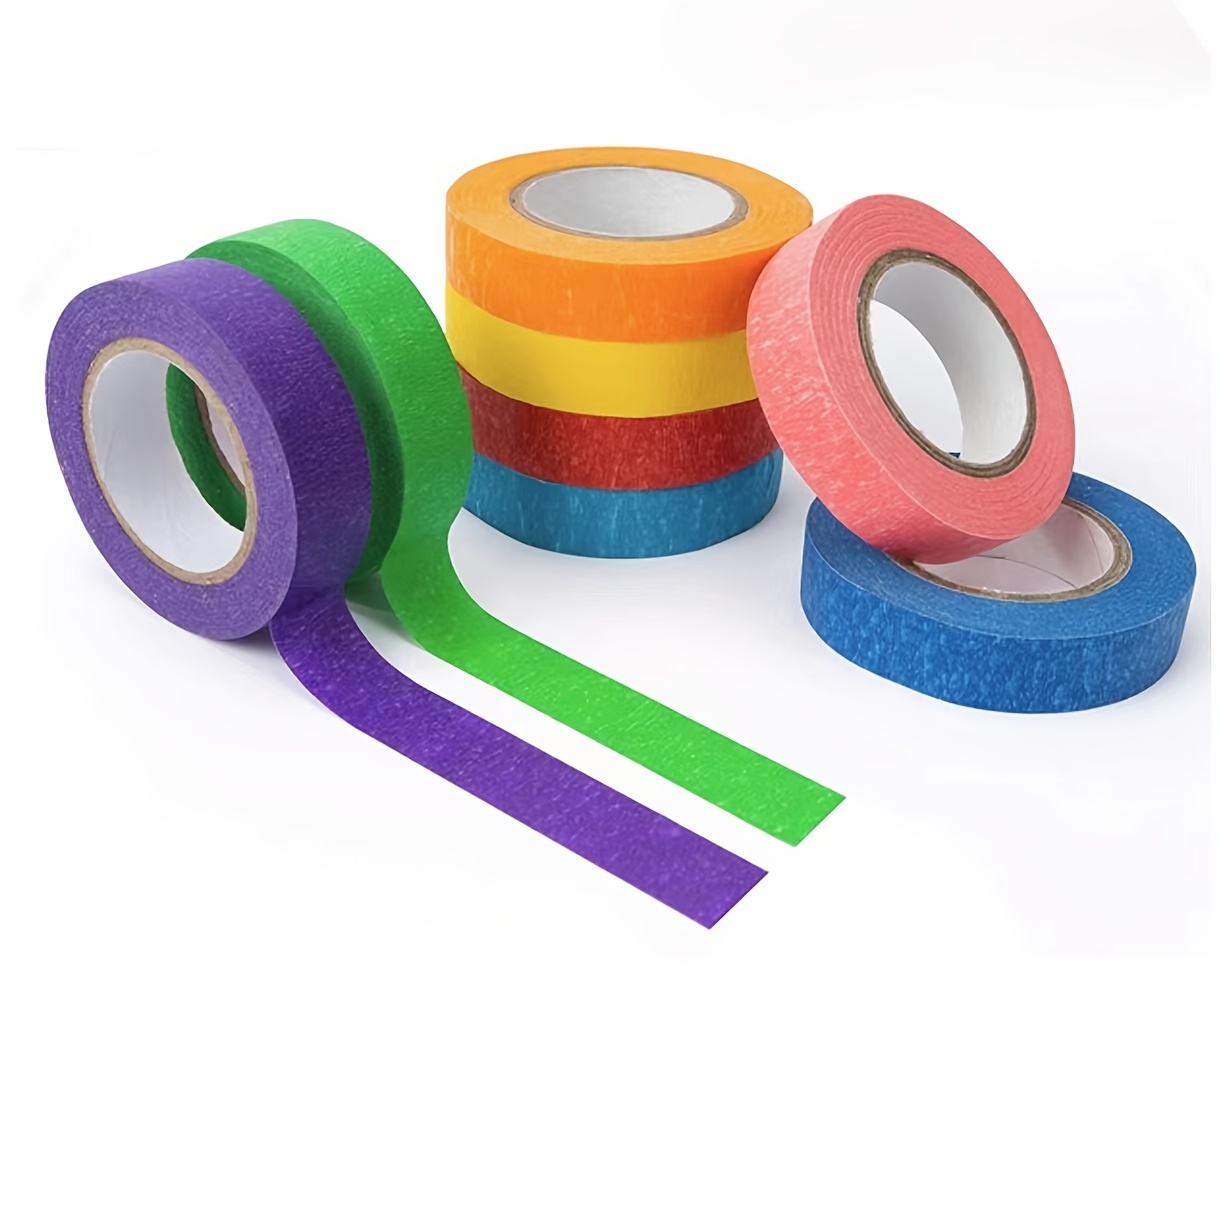 Color Masking Tape Rolls-7 Rolls 2.54 cm x 20 Yards (Approximately 20  Meters)-Color Teacher Tape, Suitable for Art, Labels, Classroom Decoration